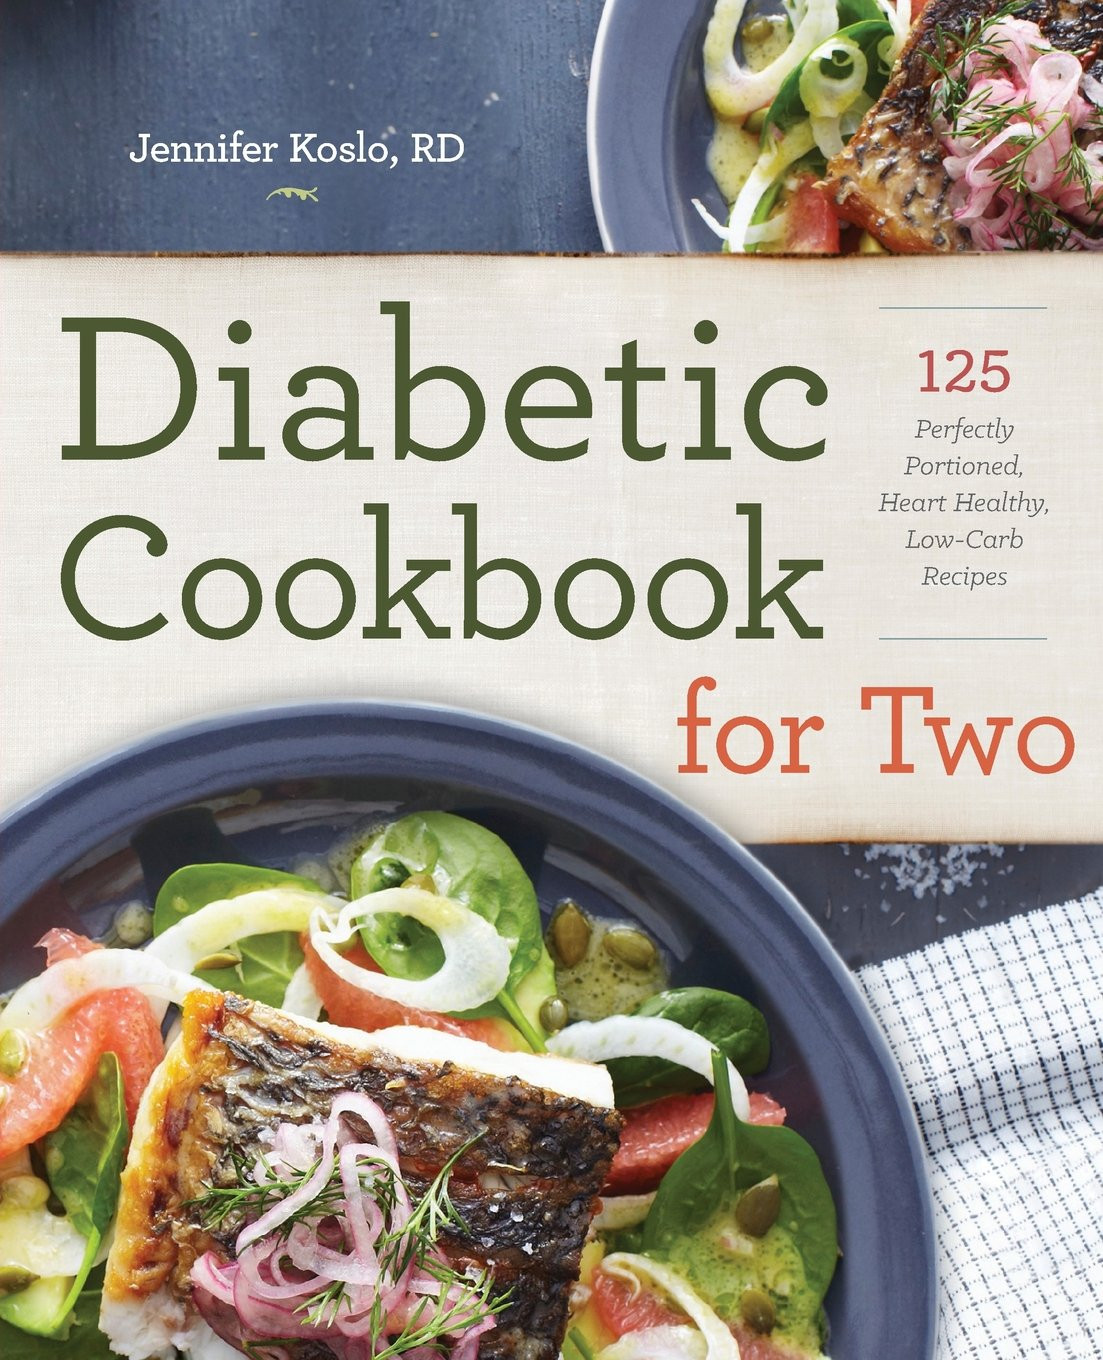 Heart Healthy Diabetic Recipes
 Diabetic Cookbook for Two 125 Perfectly Portioned Heart